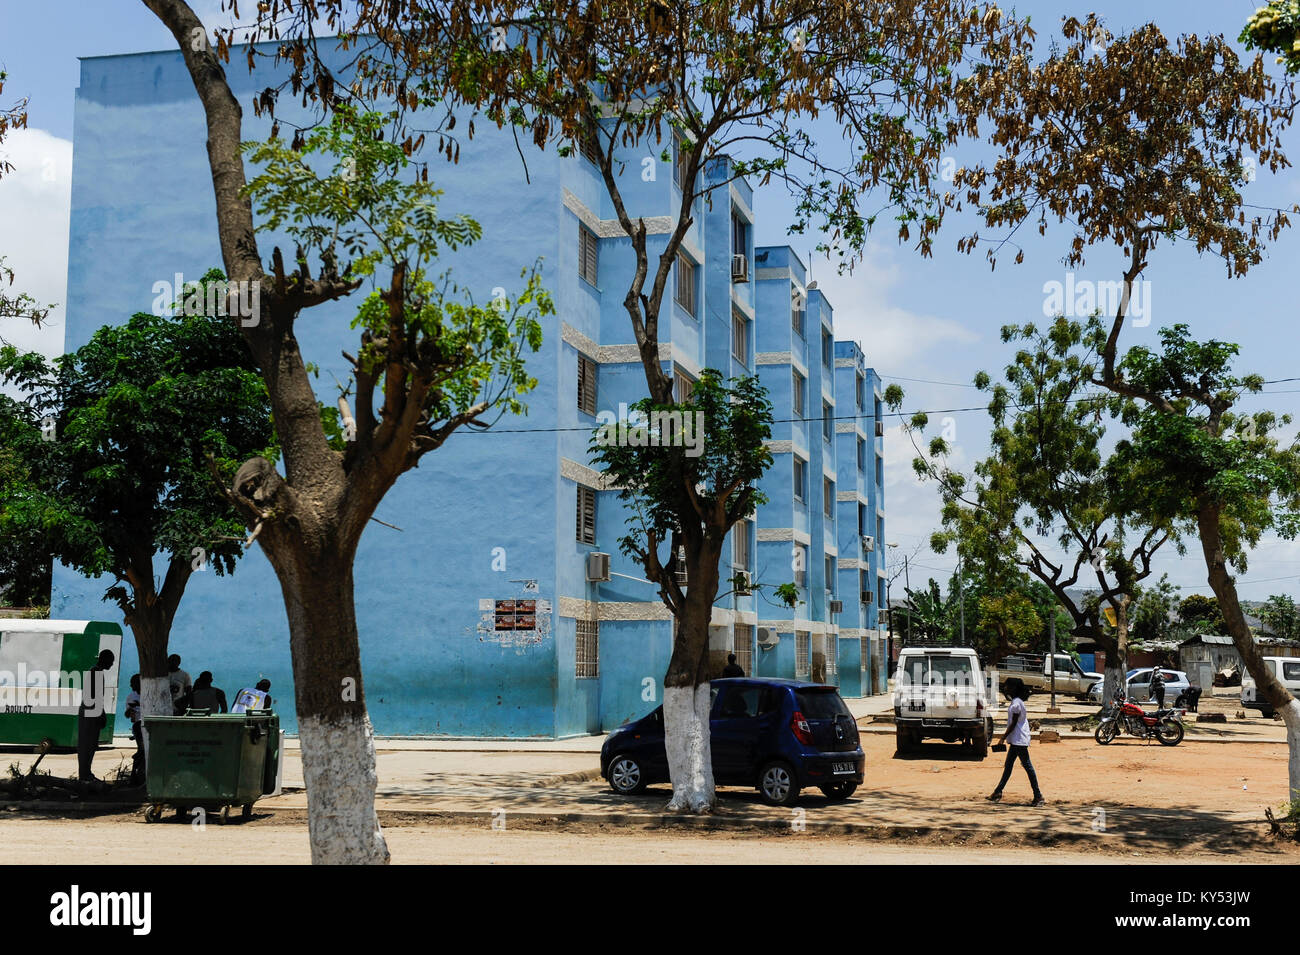 ANGOLA, Cuanza Sul, Sumbe town, block in communist GDR DDR Germany Style given as development aid Photo - Alamy